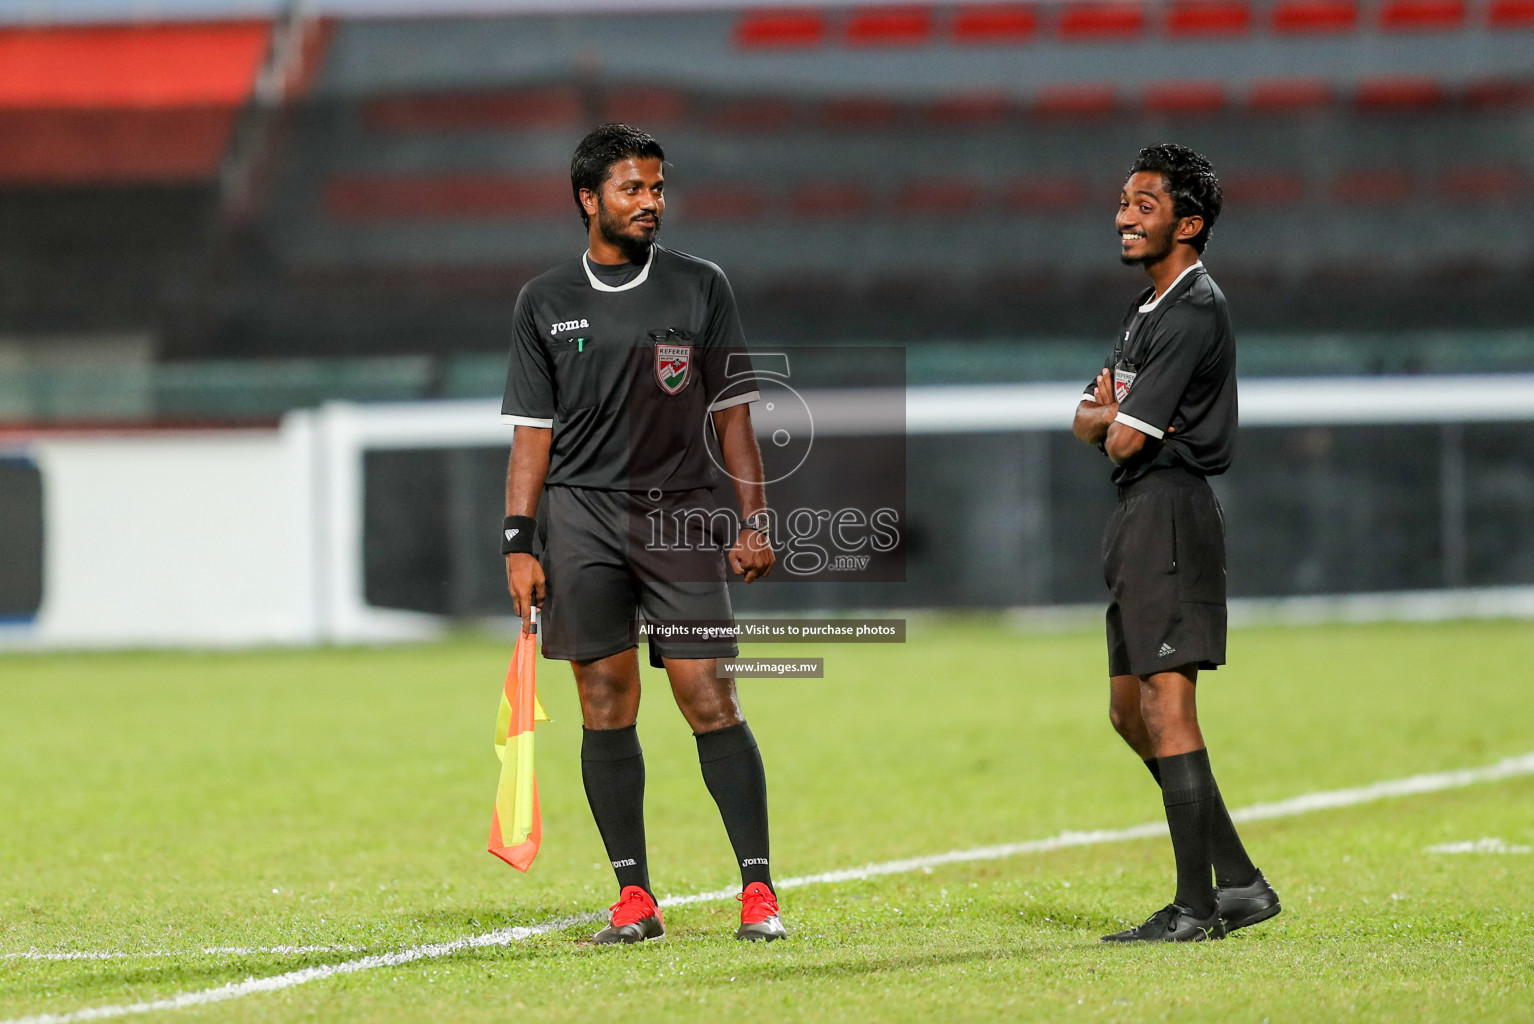 United Victory vs Nilandhoo FC in Dhiraagu Dhivehi Premier League 2019, in Male' Maldives on 15th Oct 2019. Photos:Suadh Abdul Sattar / images.mv